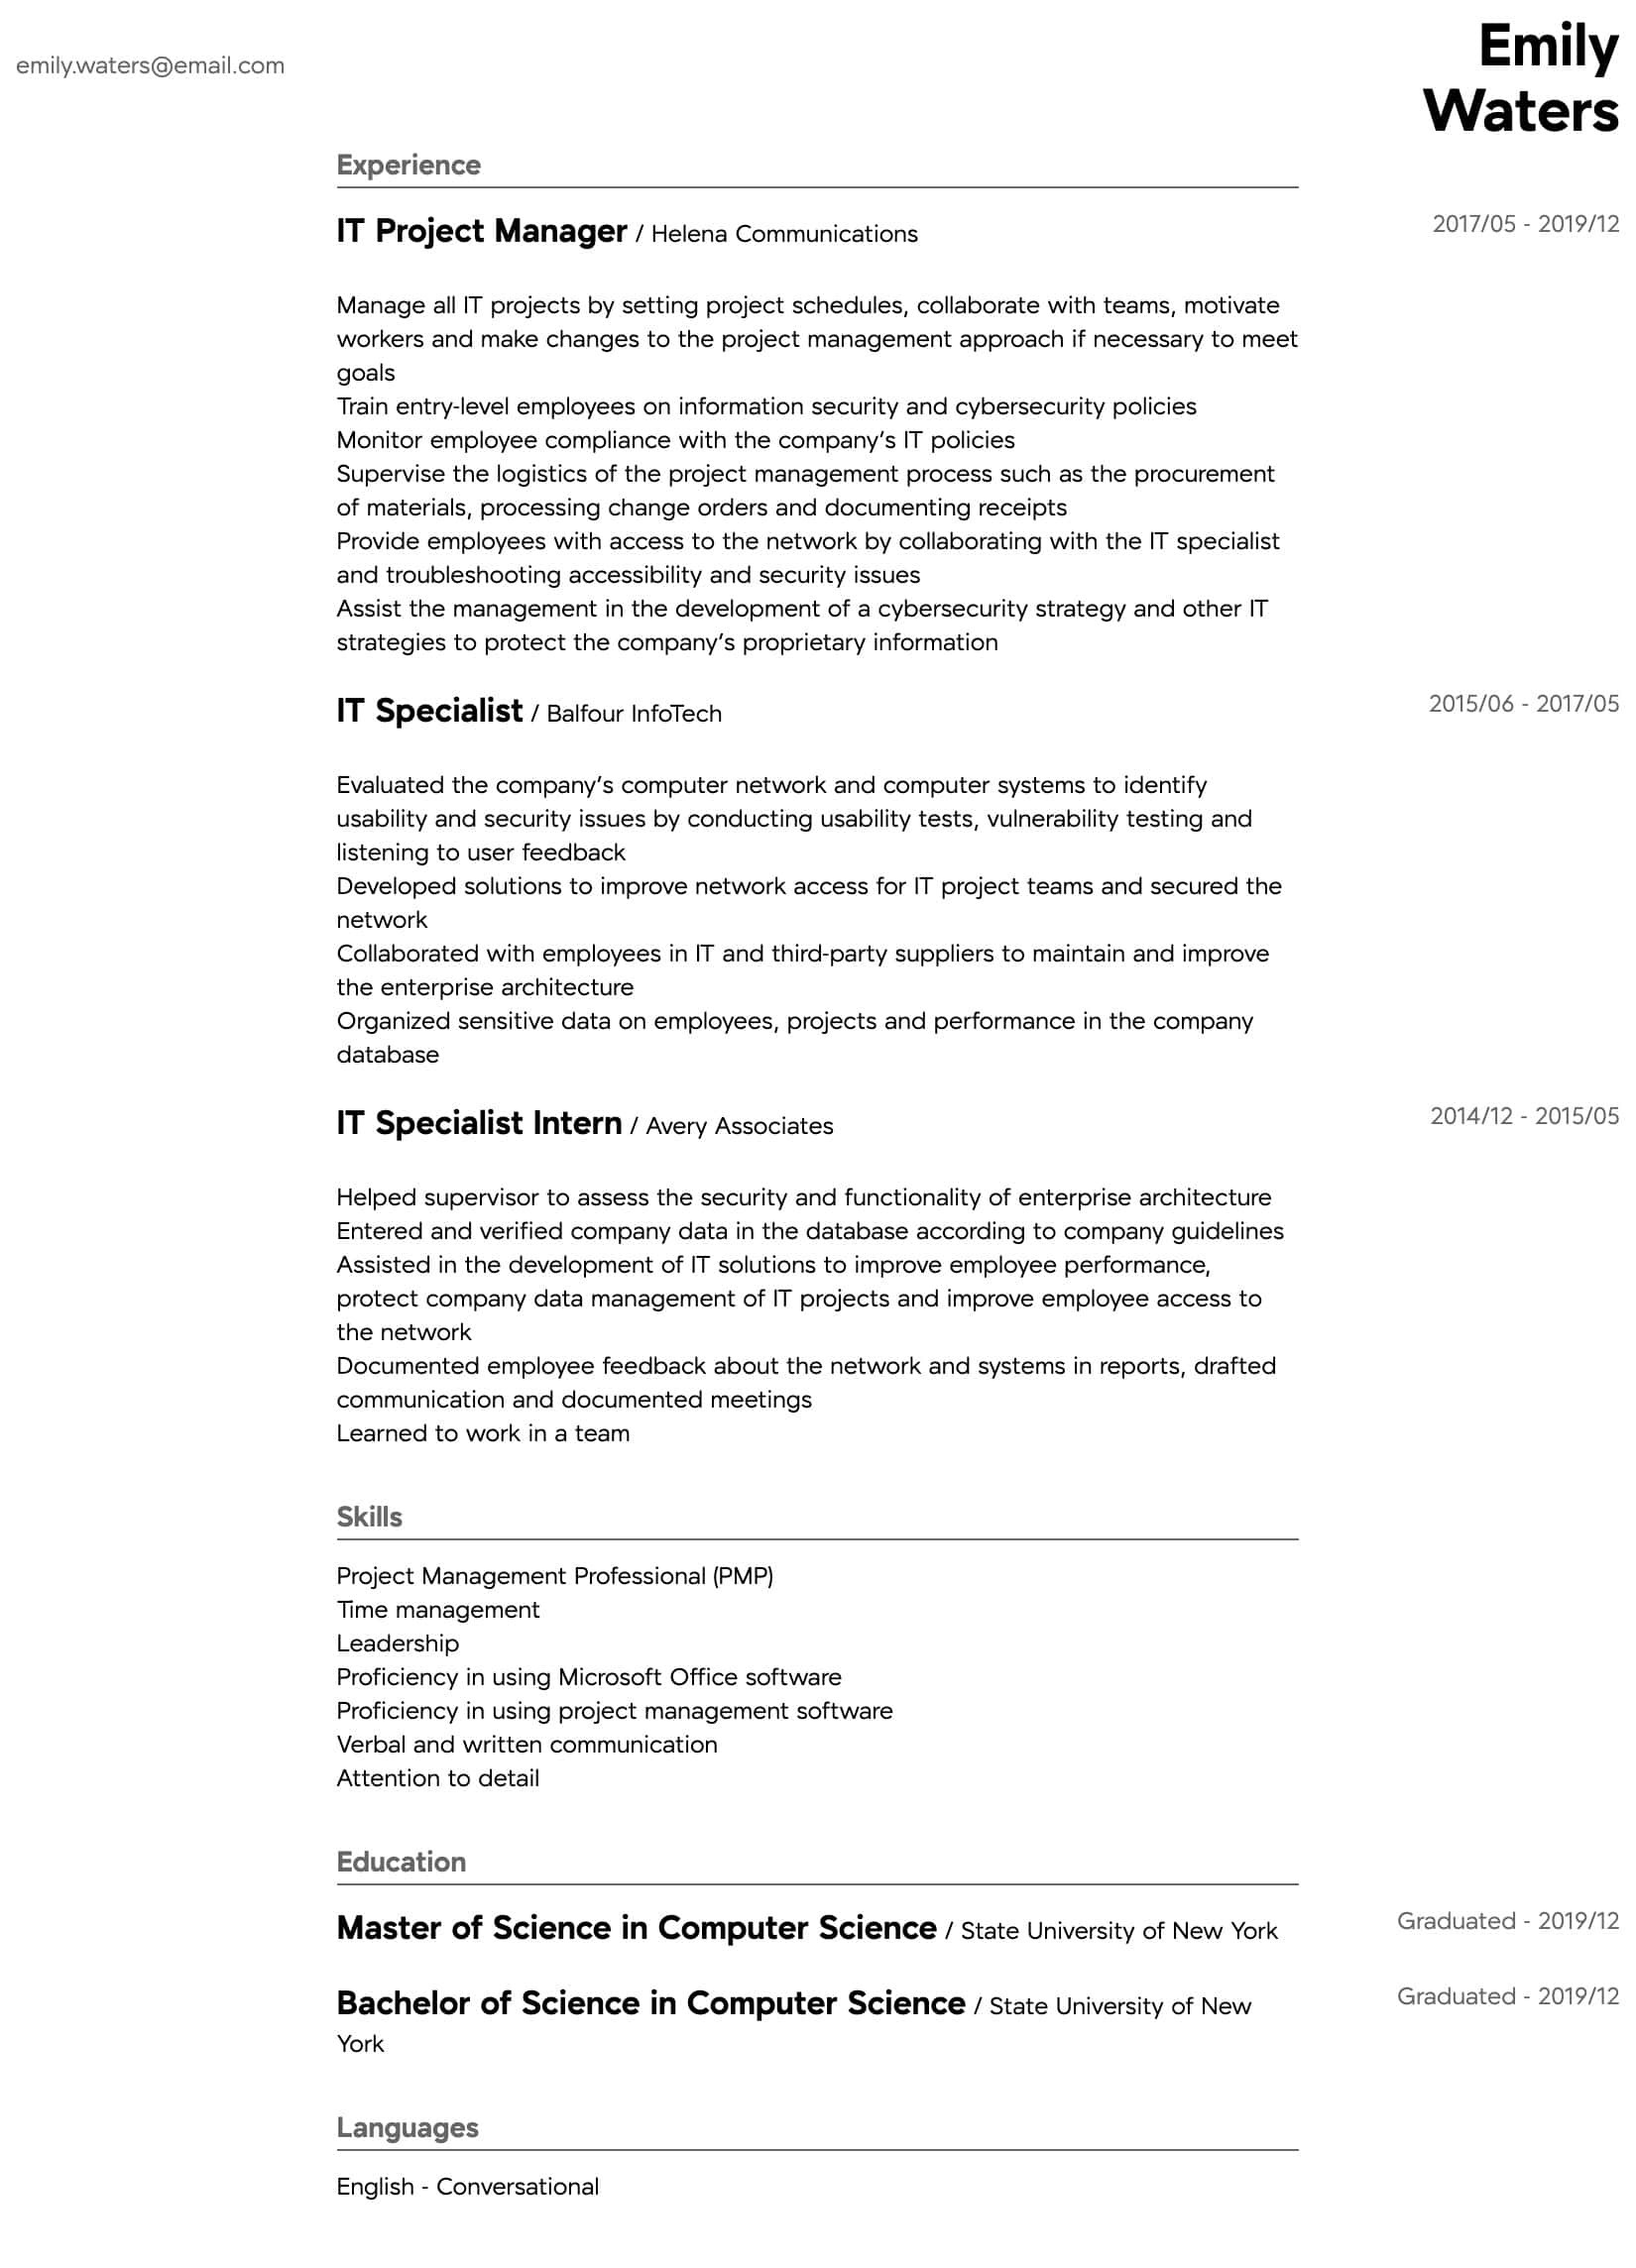 Network Security Project Manager Sample Resume It Project Manager Resume Samples All Experience Levels Resume …